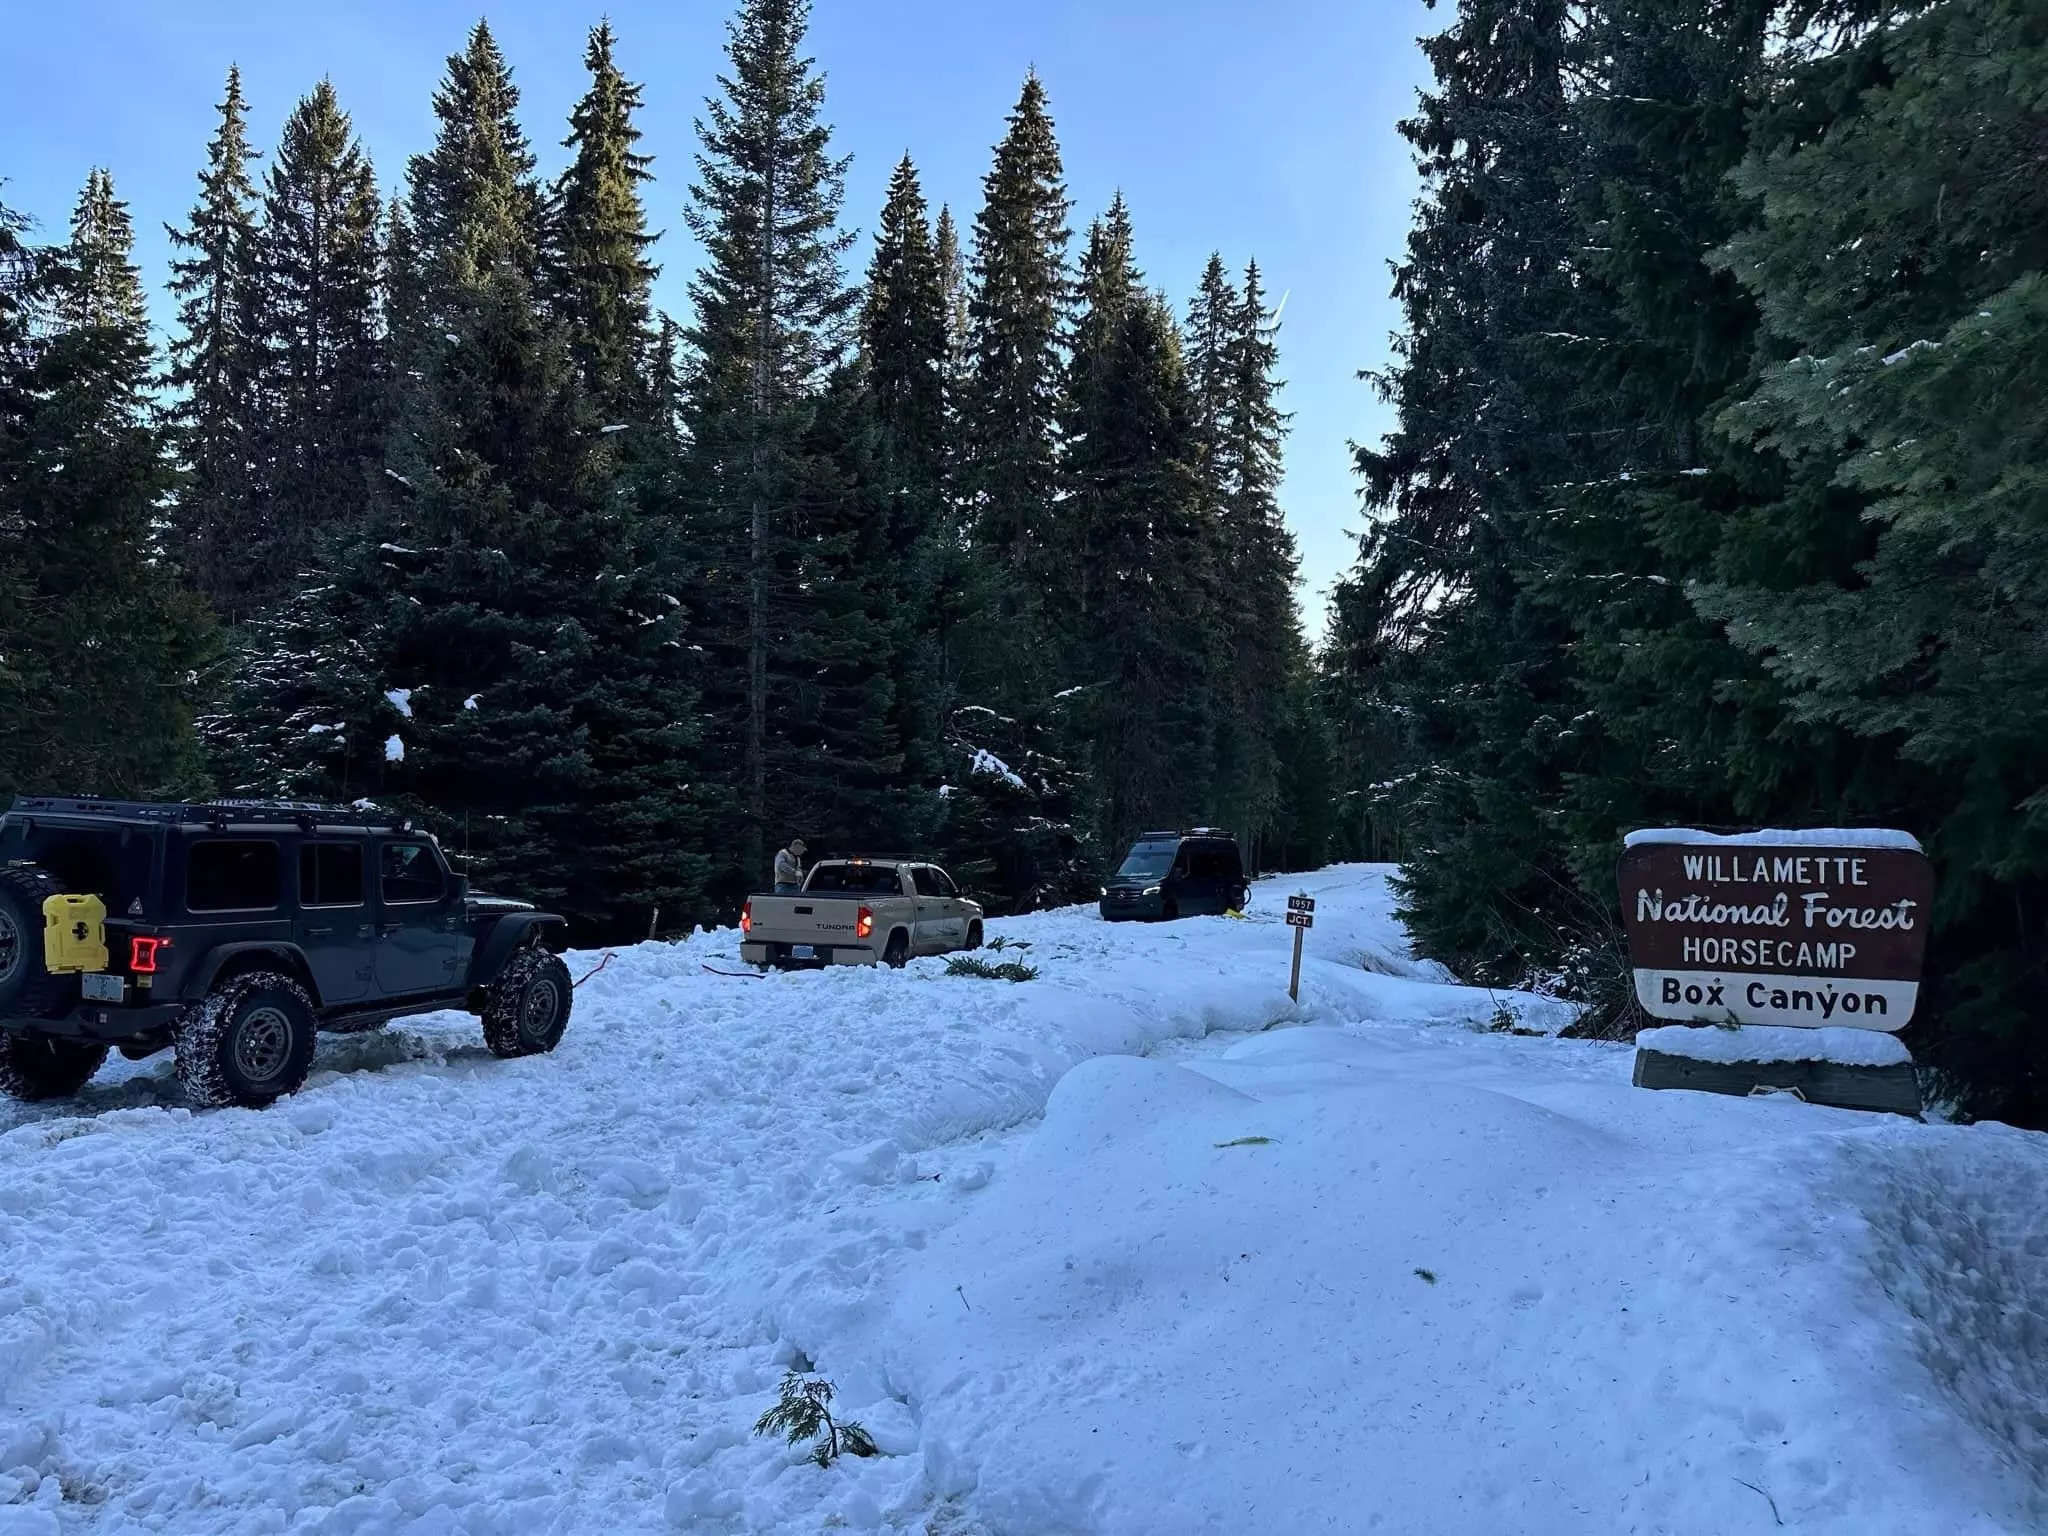 Vehicles stuck on snowy road surrounded by pine trees with a sign for Willamette National Forest.